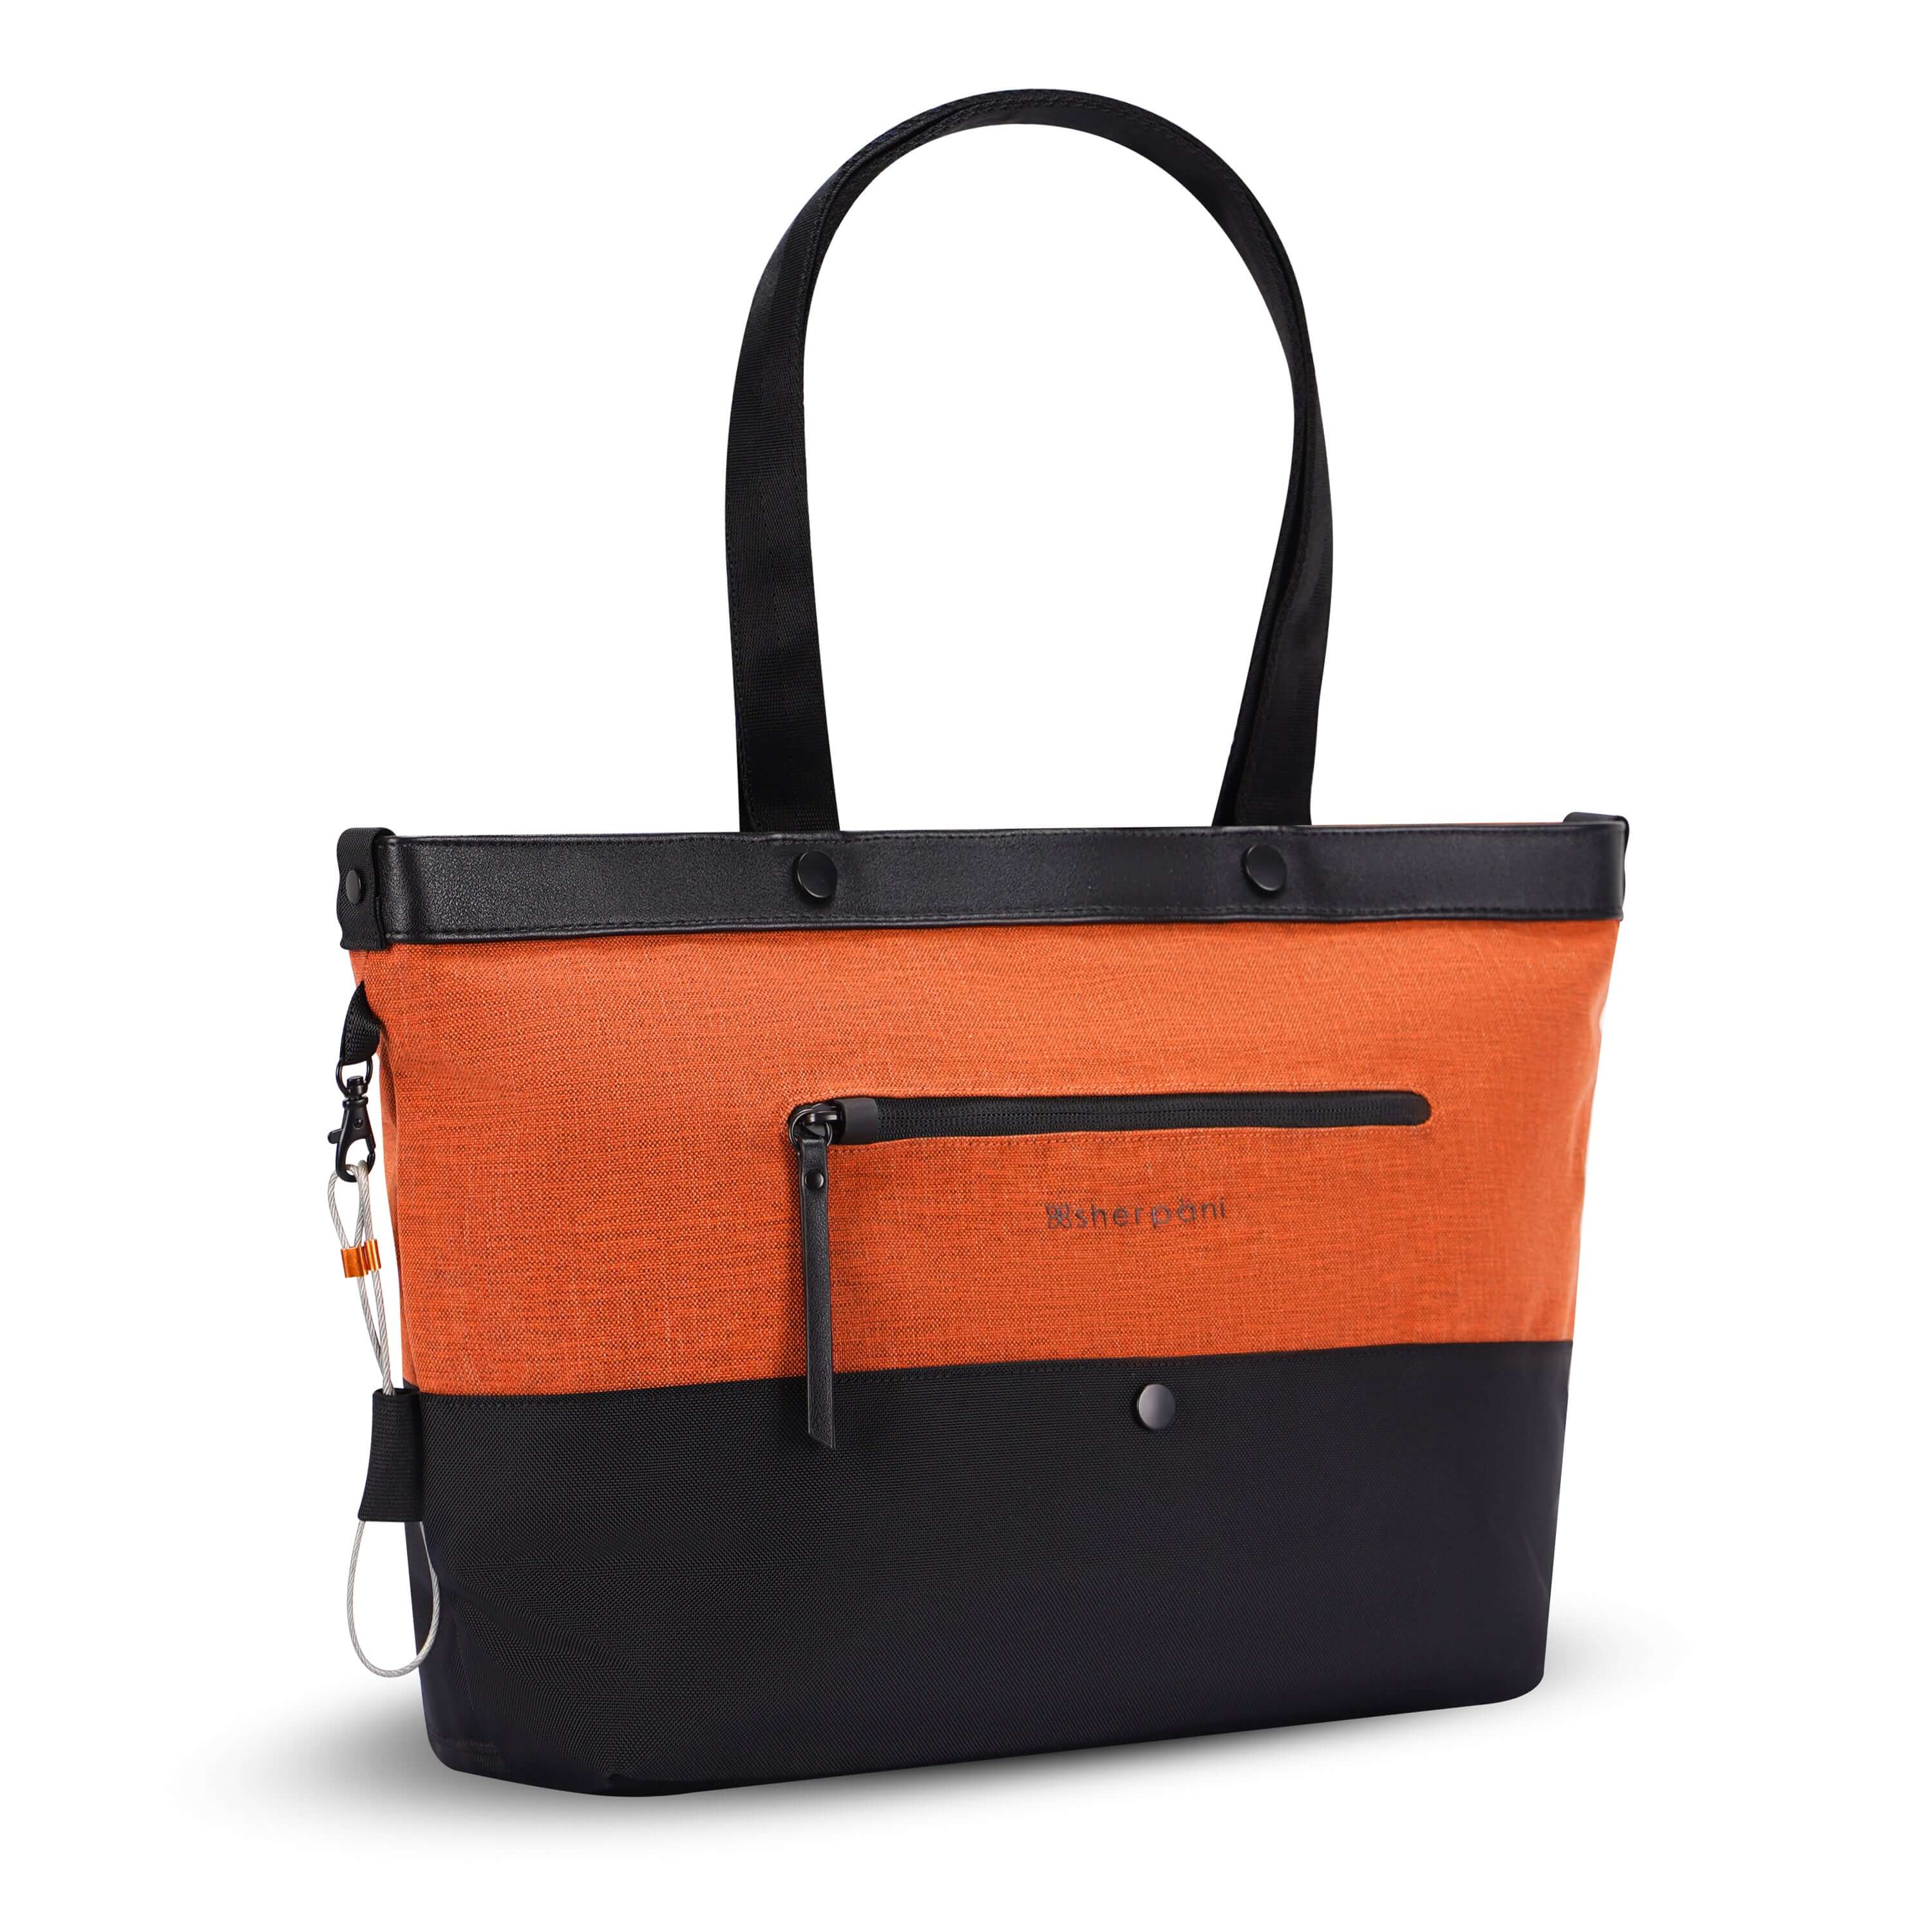 Angled front view of Sherpani's Anti-Theft tote, the Cali AT in Copper, with vegan leather accents in black. There is an external compartment on the front of the bag with a locking zipper. A chair loop lock is clipped to the side of the bag and is held in place by an elastic tab.